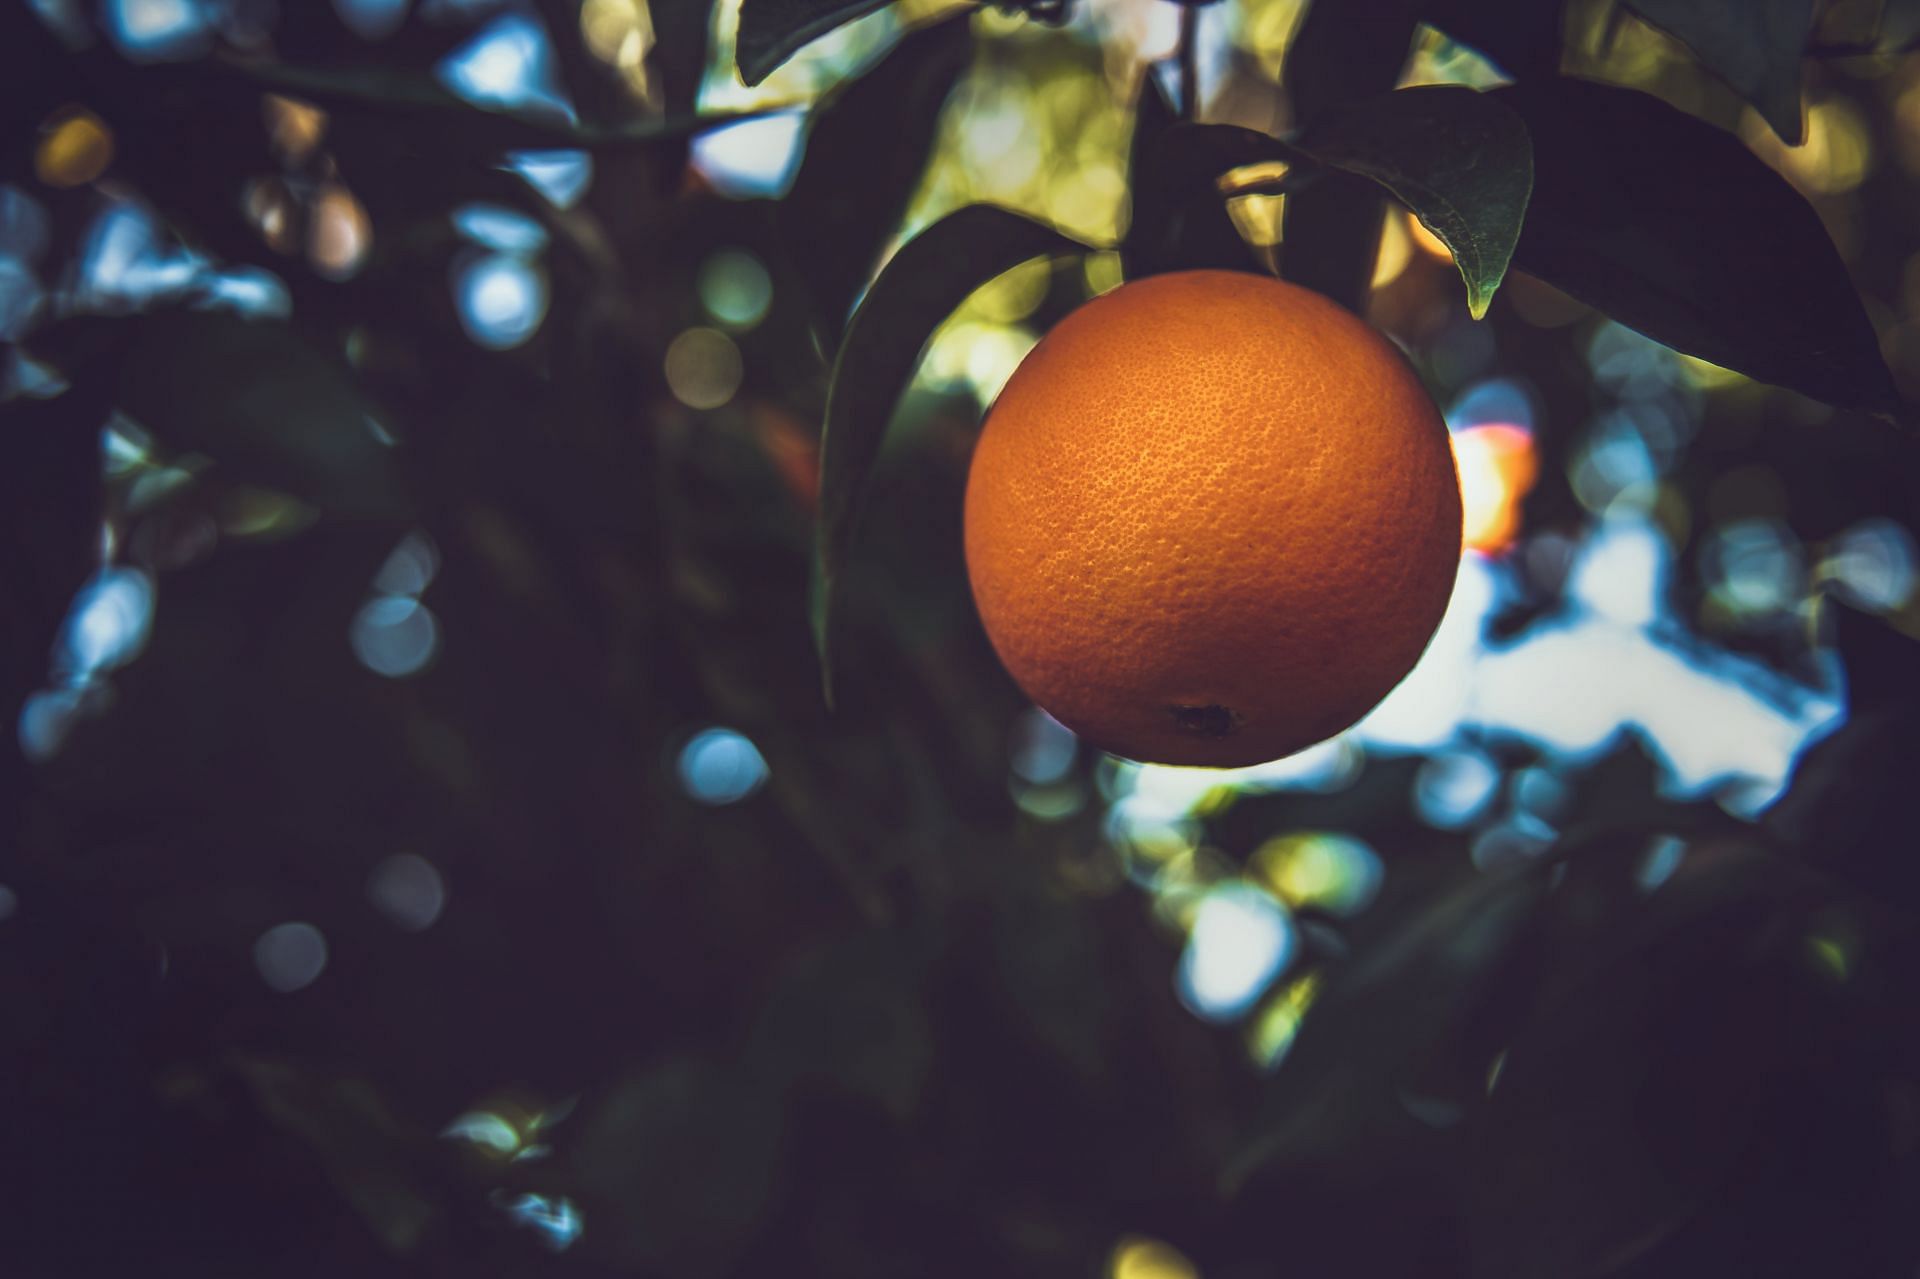 Benefits of juice made from orange for cholesterol (image sourced via Pexels / Photo by tim)